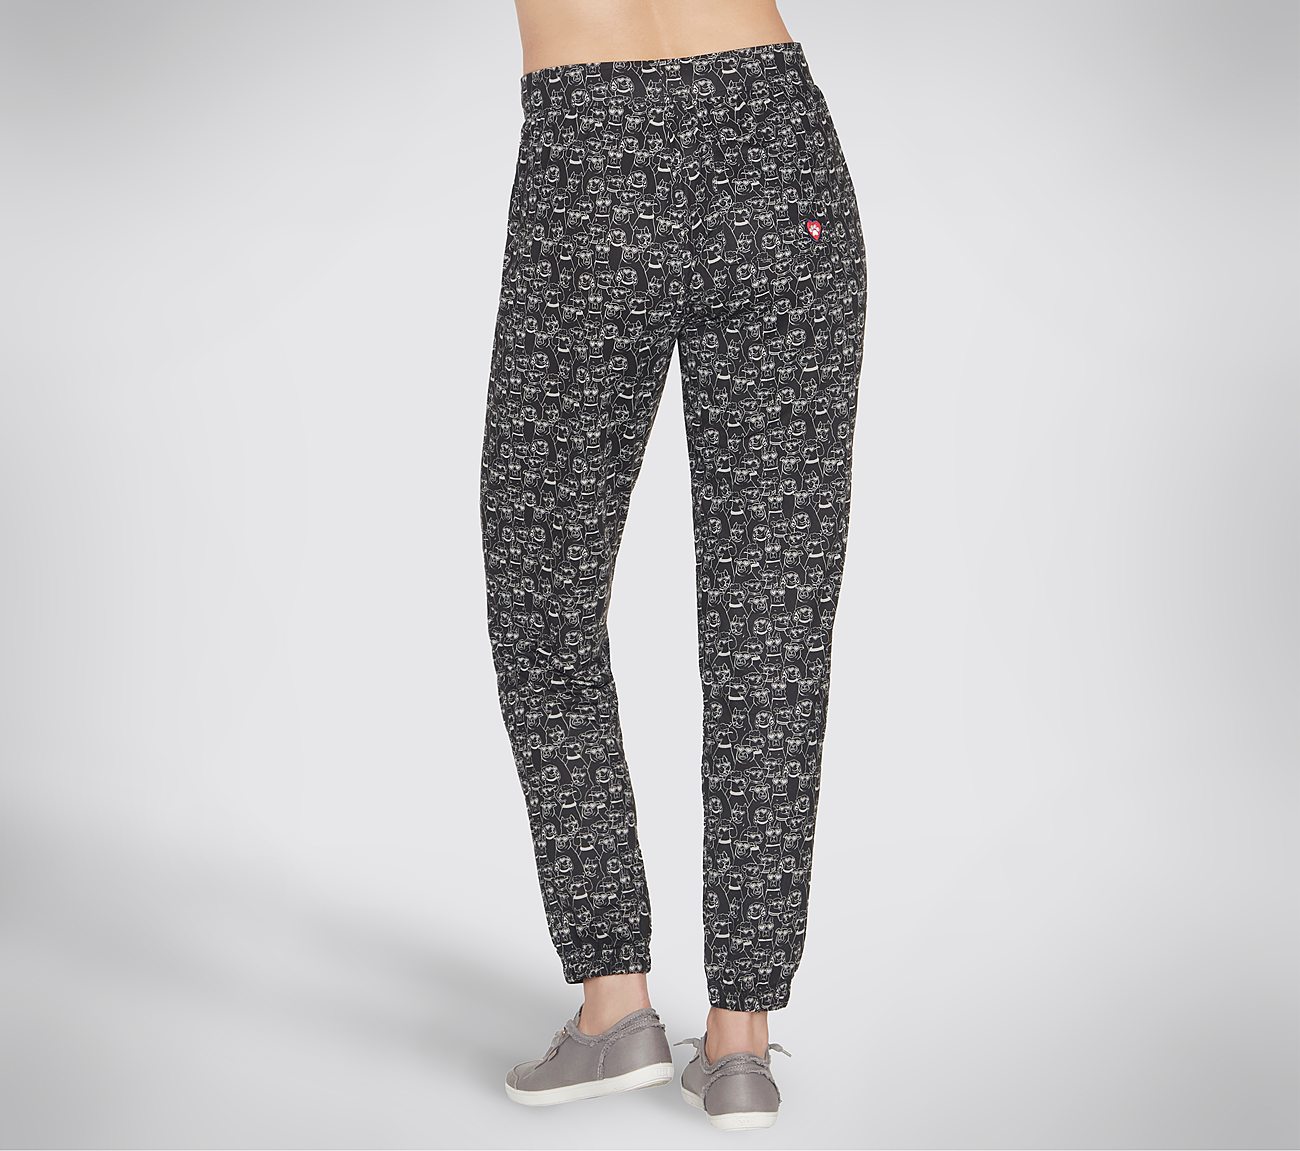 HEART EYES PEACHY PAWS JOGGER, BBBBLACK Apparels Top View